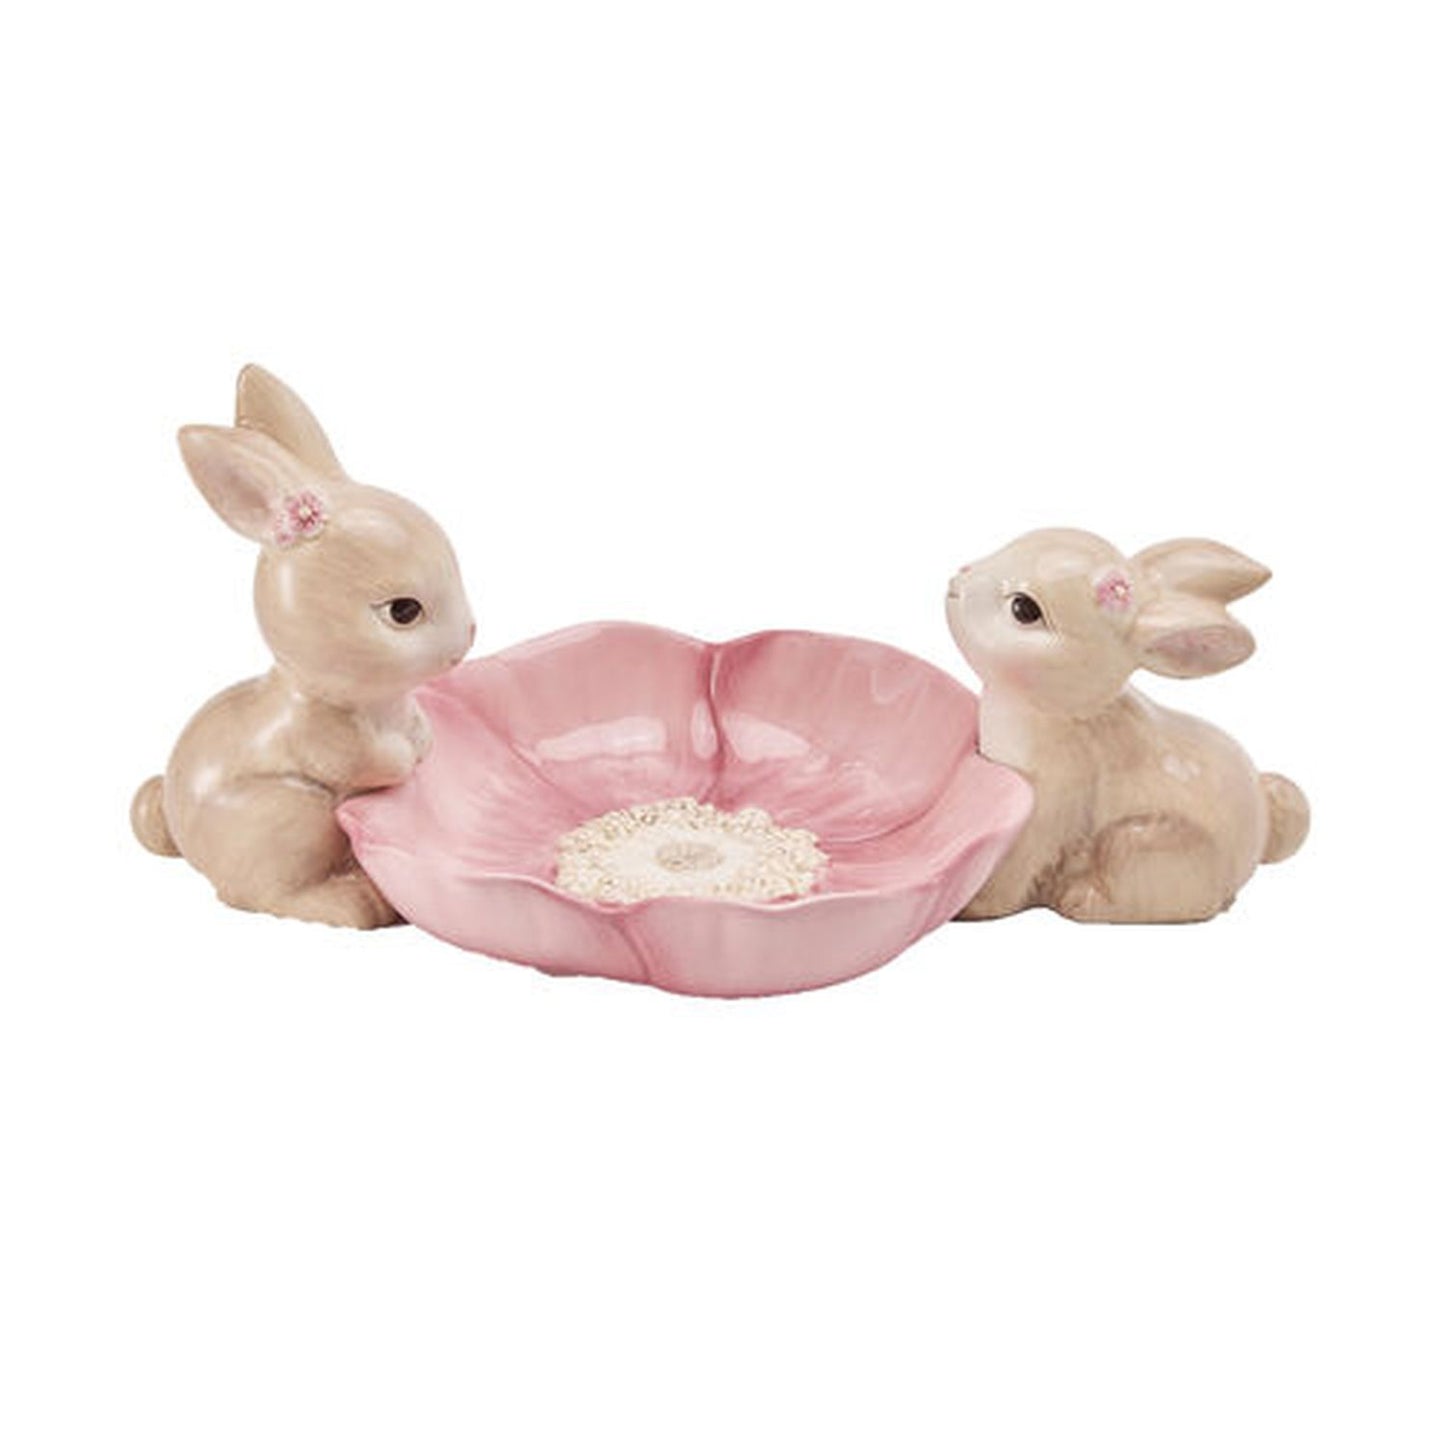 December Diamonds Spring Confections 12" Bunny Couple With Pink Bowl